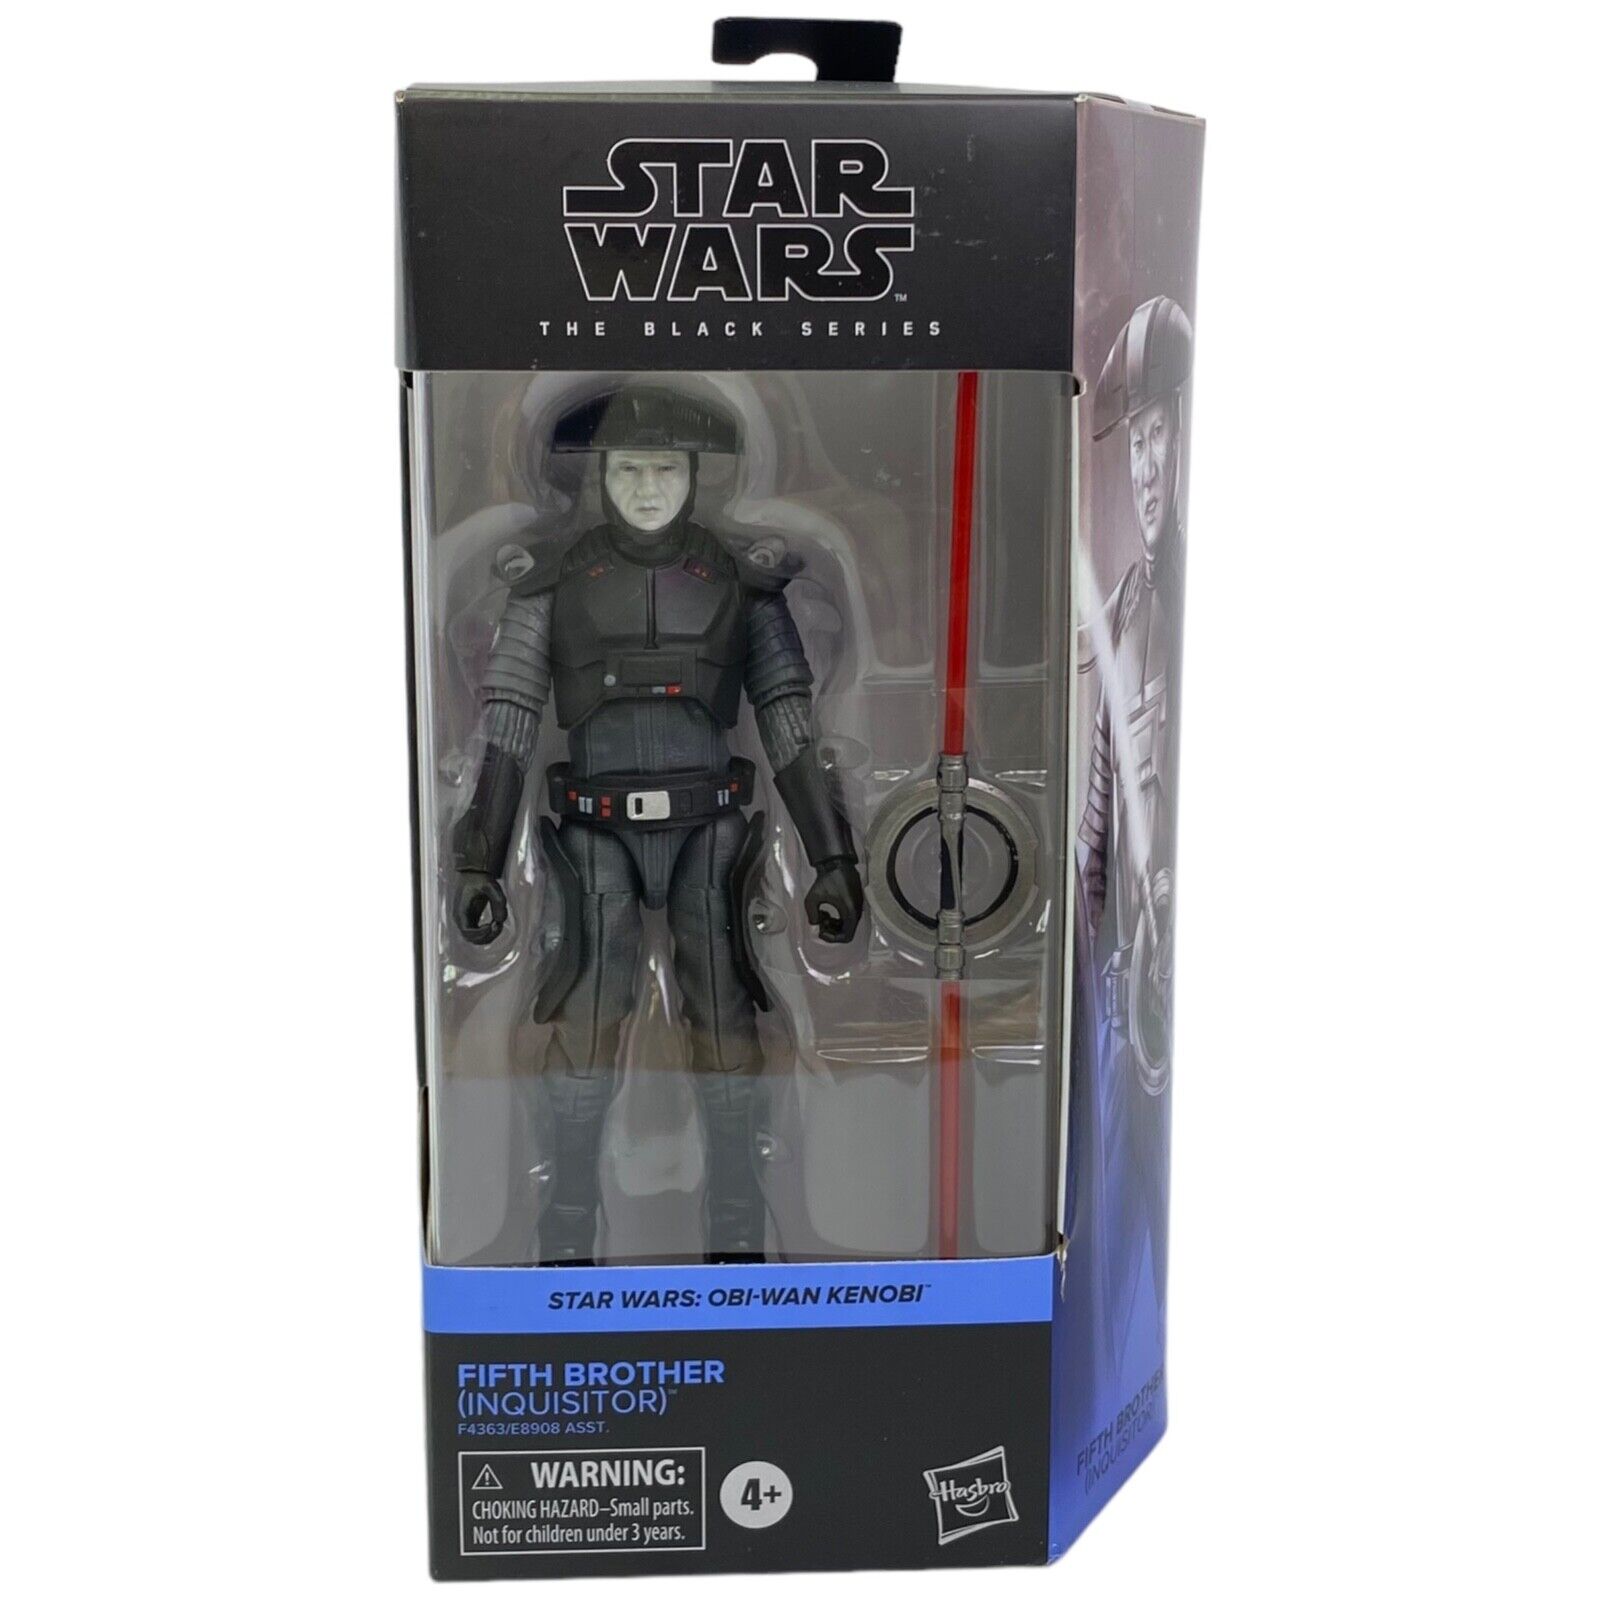 Star Wars Black Series Fifth Brother Inquisitor 6" Action Figure 2022 Hasbro